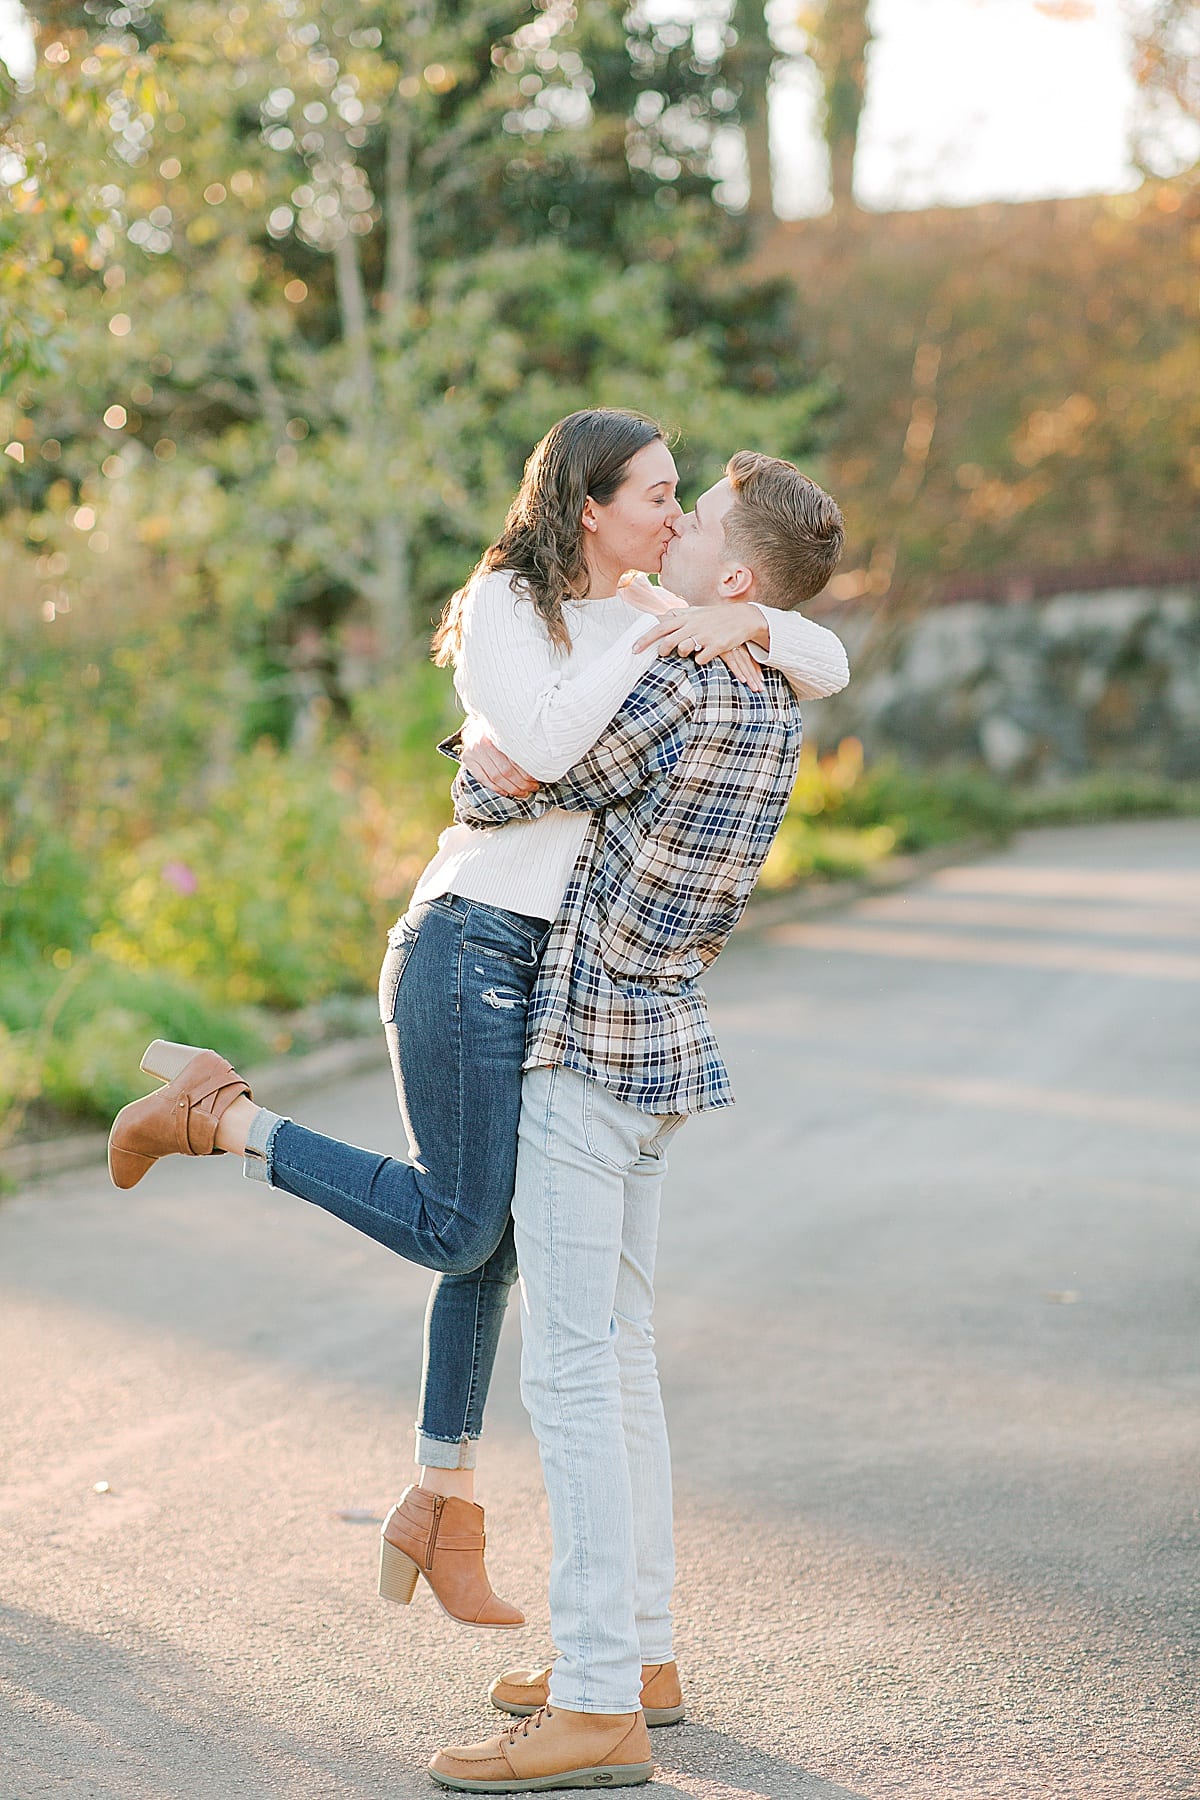 Biltmore House Engagement Session Couple Kissing in The Garden Photo